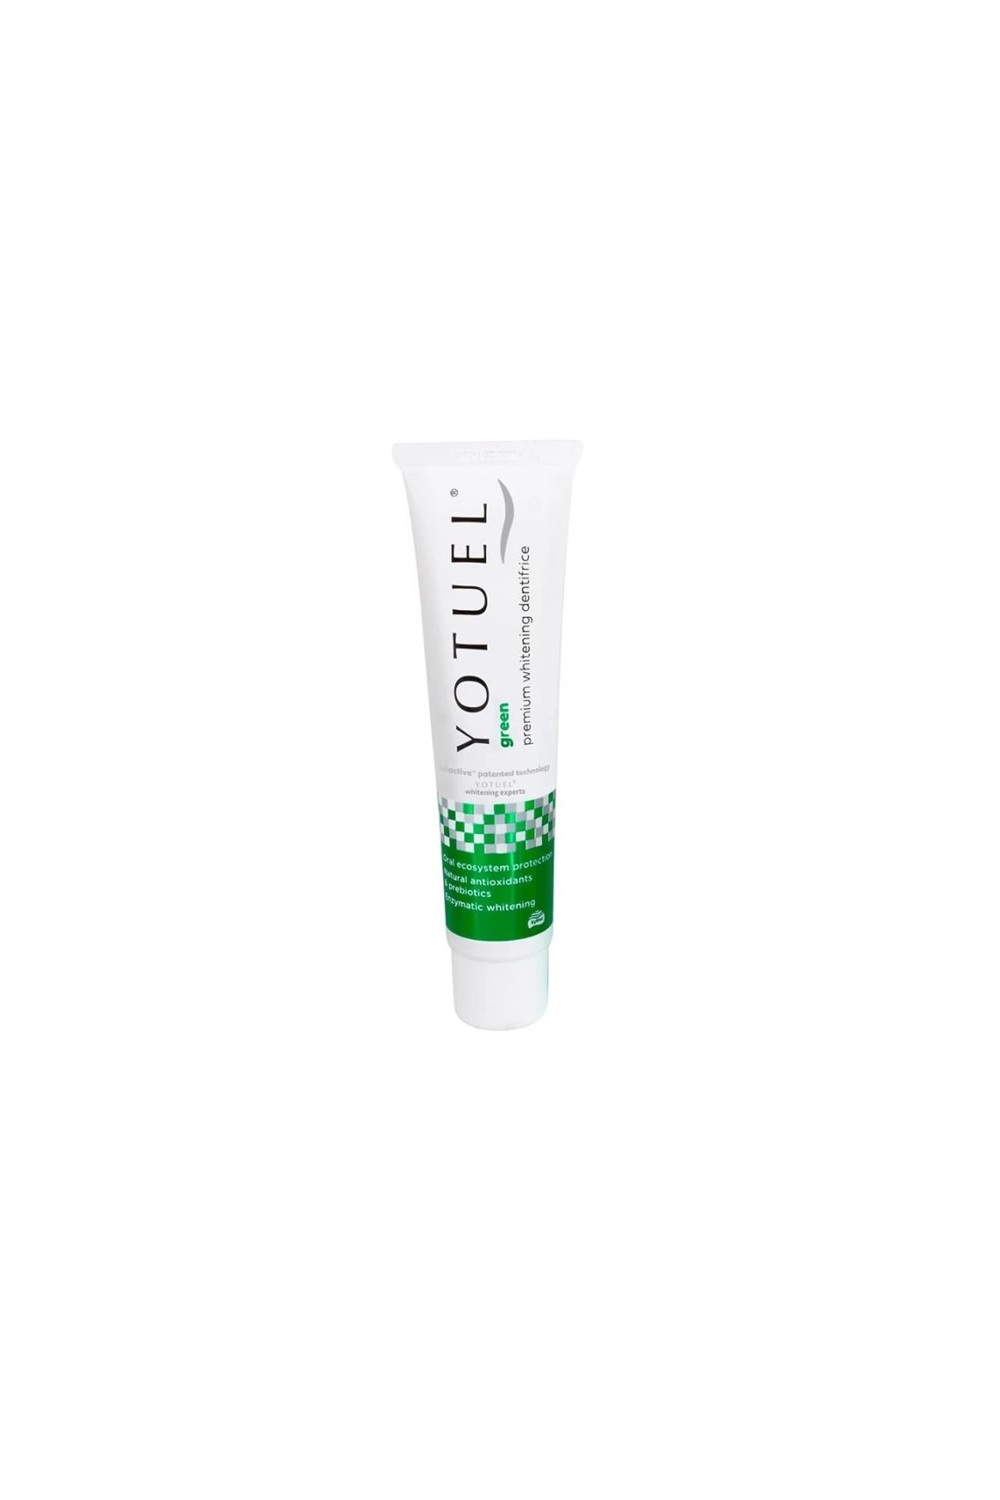 Yotuel Green Microbiome Care Toothpaste 100g